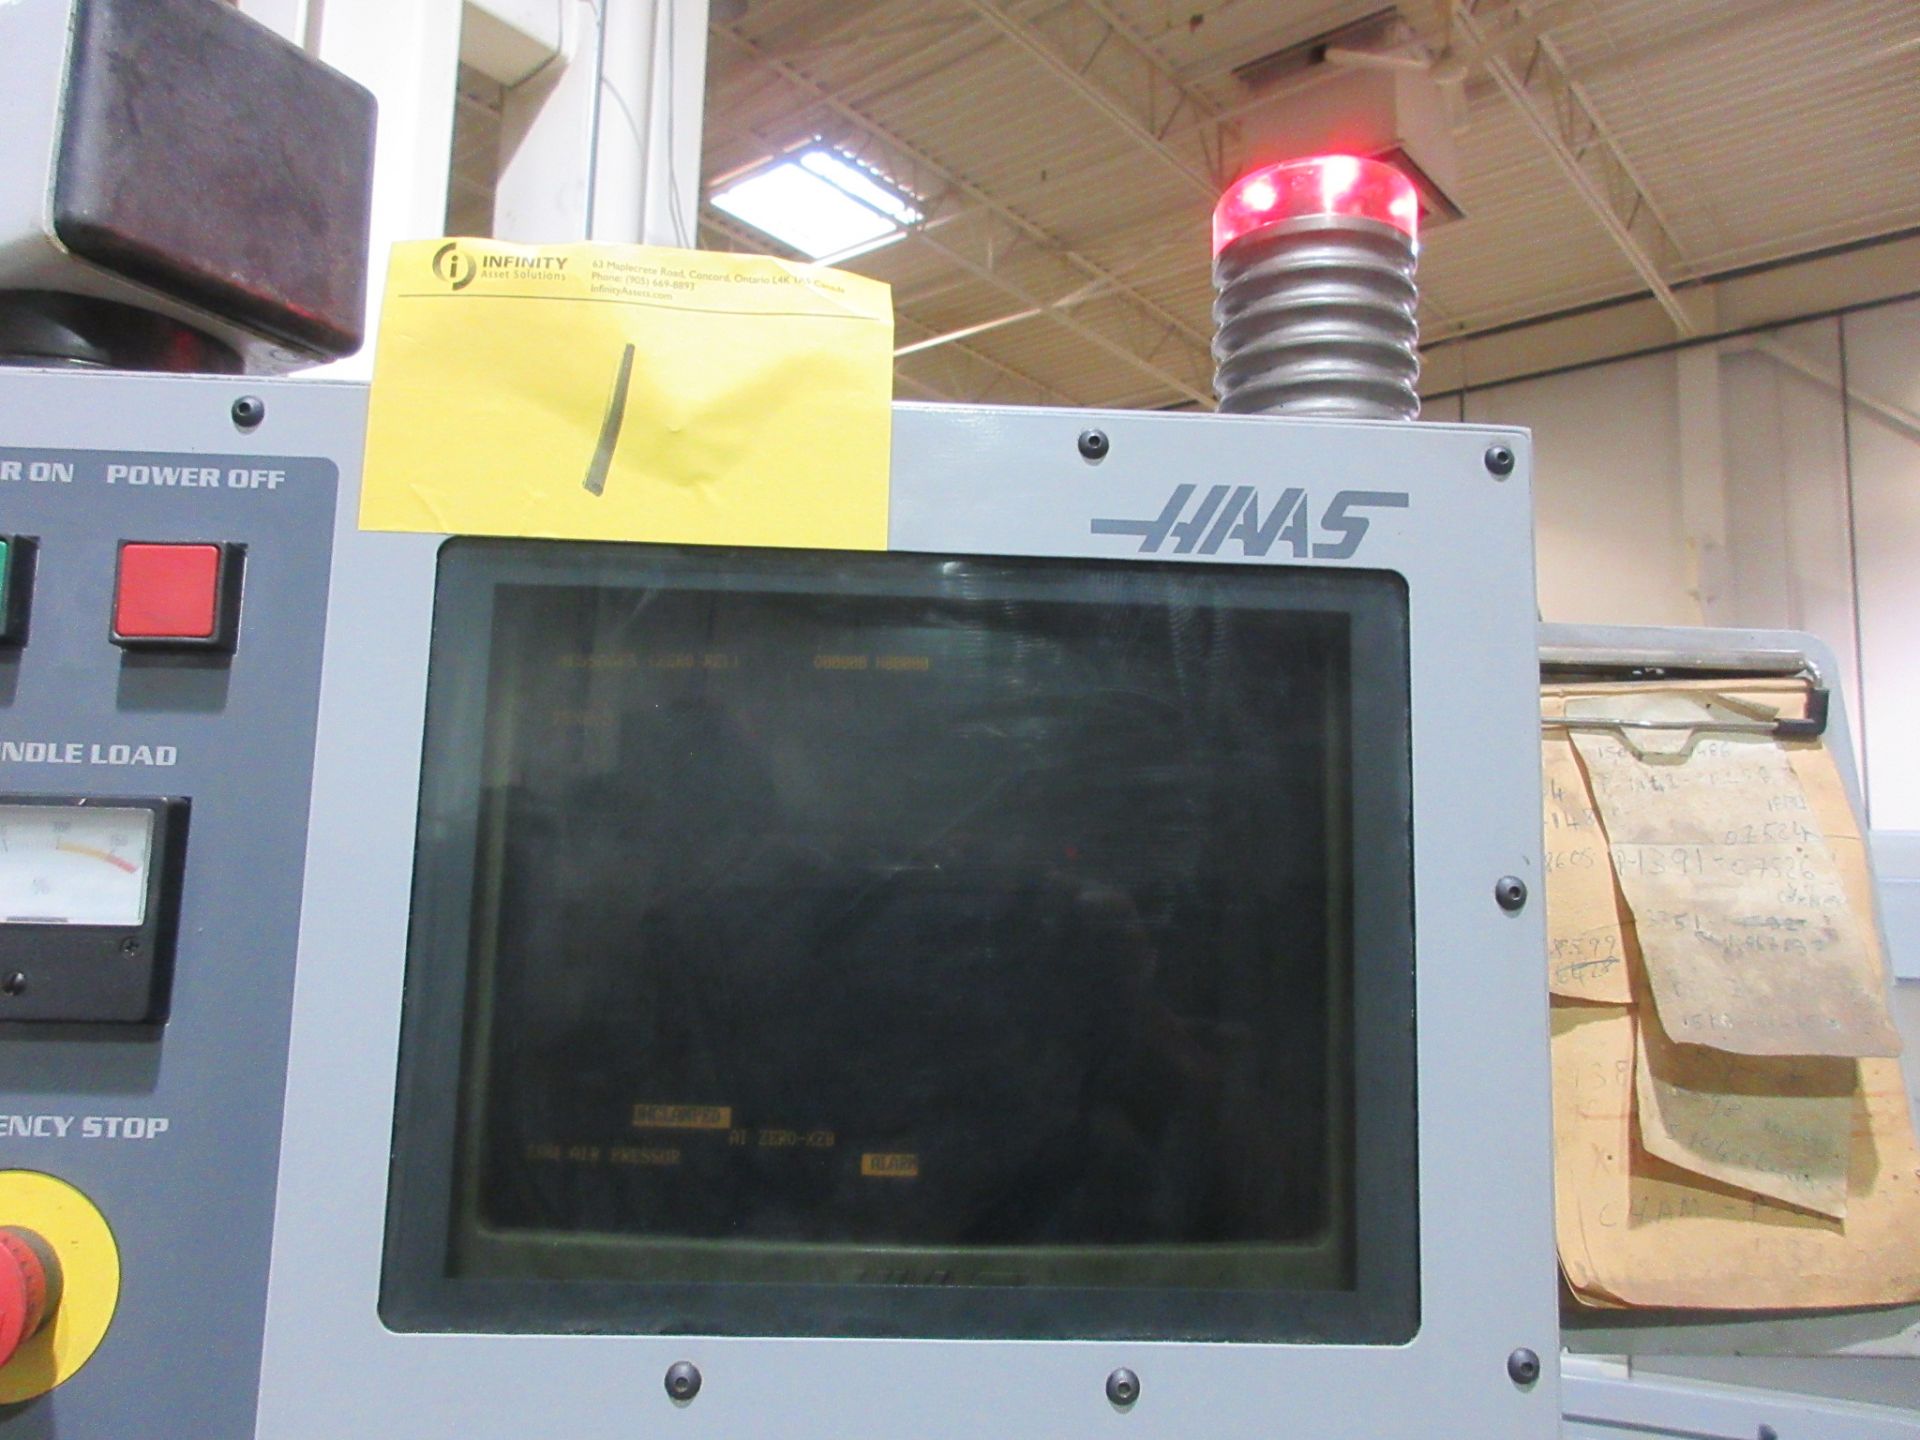 2002 HAAS SL-30T CNC LATHE, S/N 64801, CNC CONTROL, 10” 3-JAW CHUCK, TOOL PRESETTER, 12-STATION - Image 4 of 20